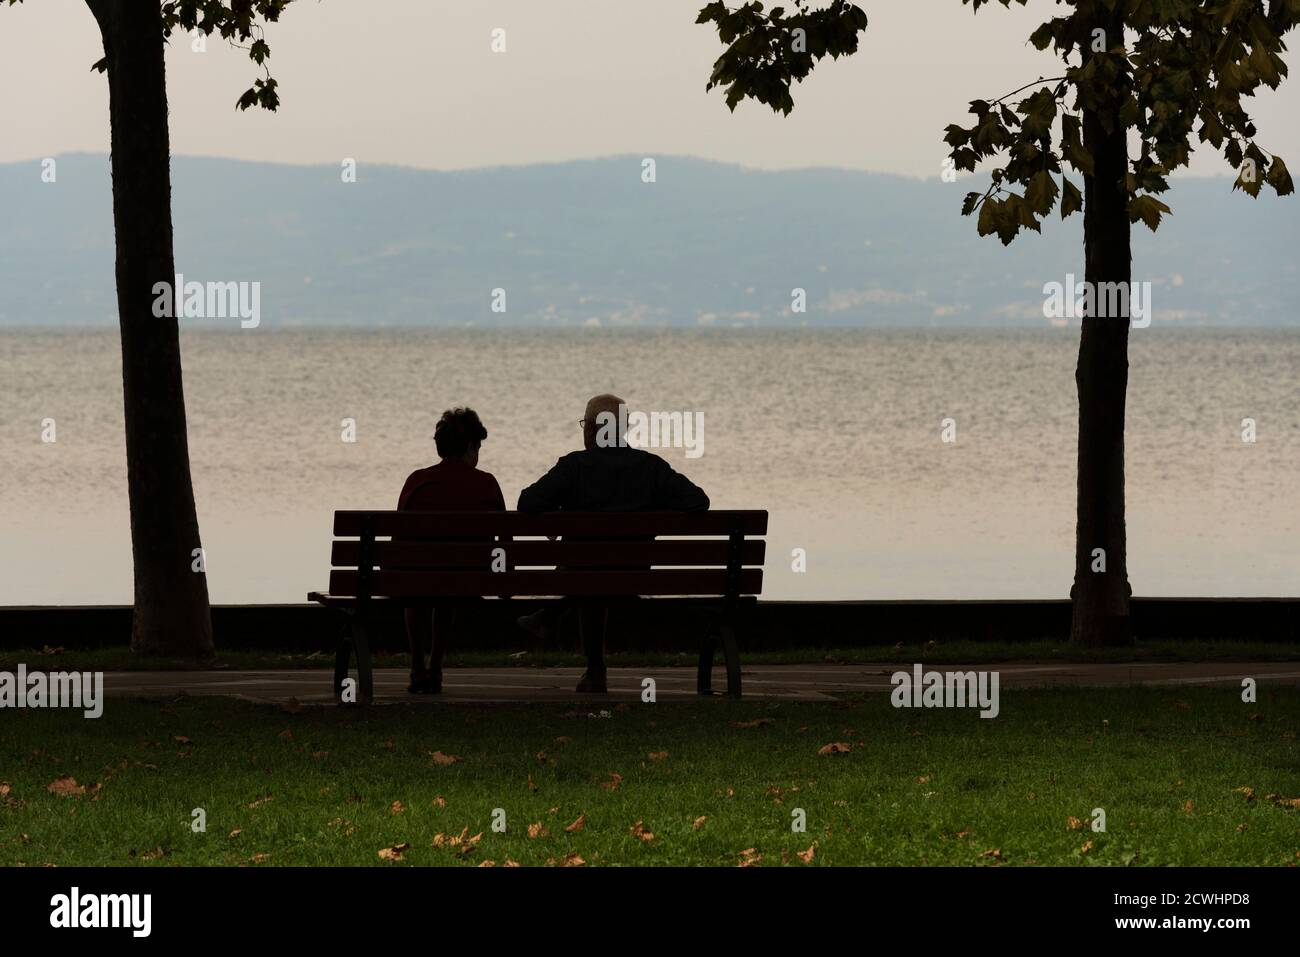 A couple of old men look at the landscape sitting on a bench at dusk Stock Photo